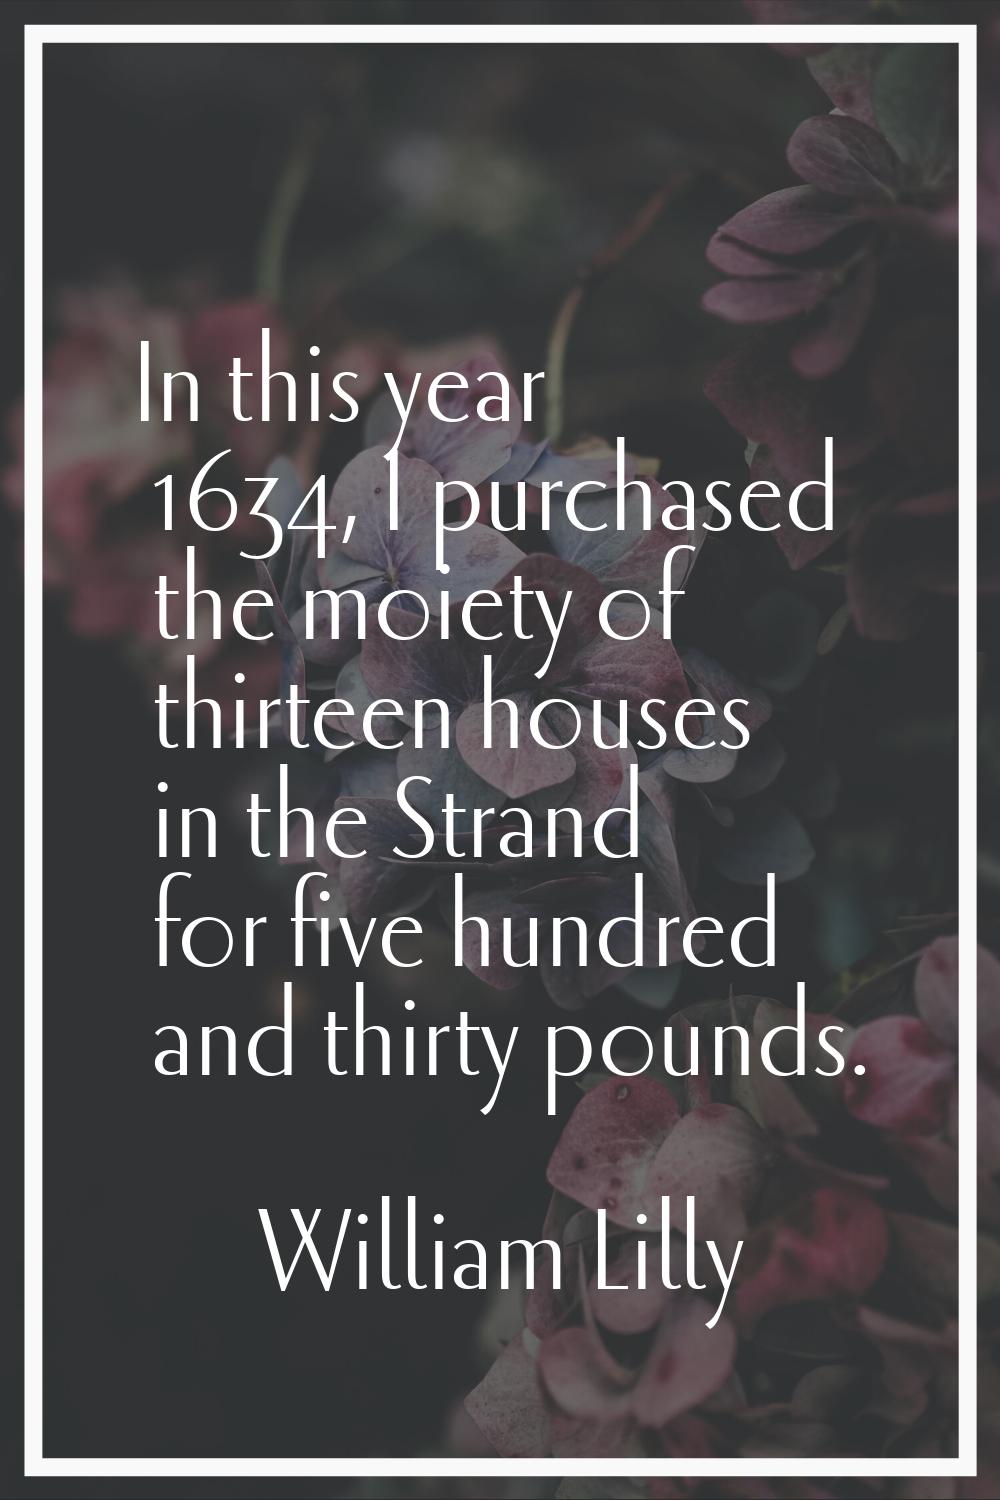 In this year 1634, I purchased the moiety of thirteen houses in the Strand for five hundred and thi